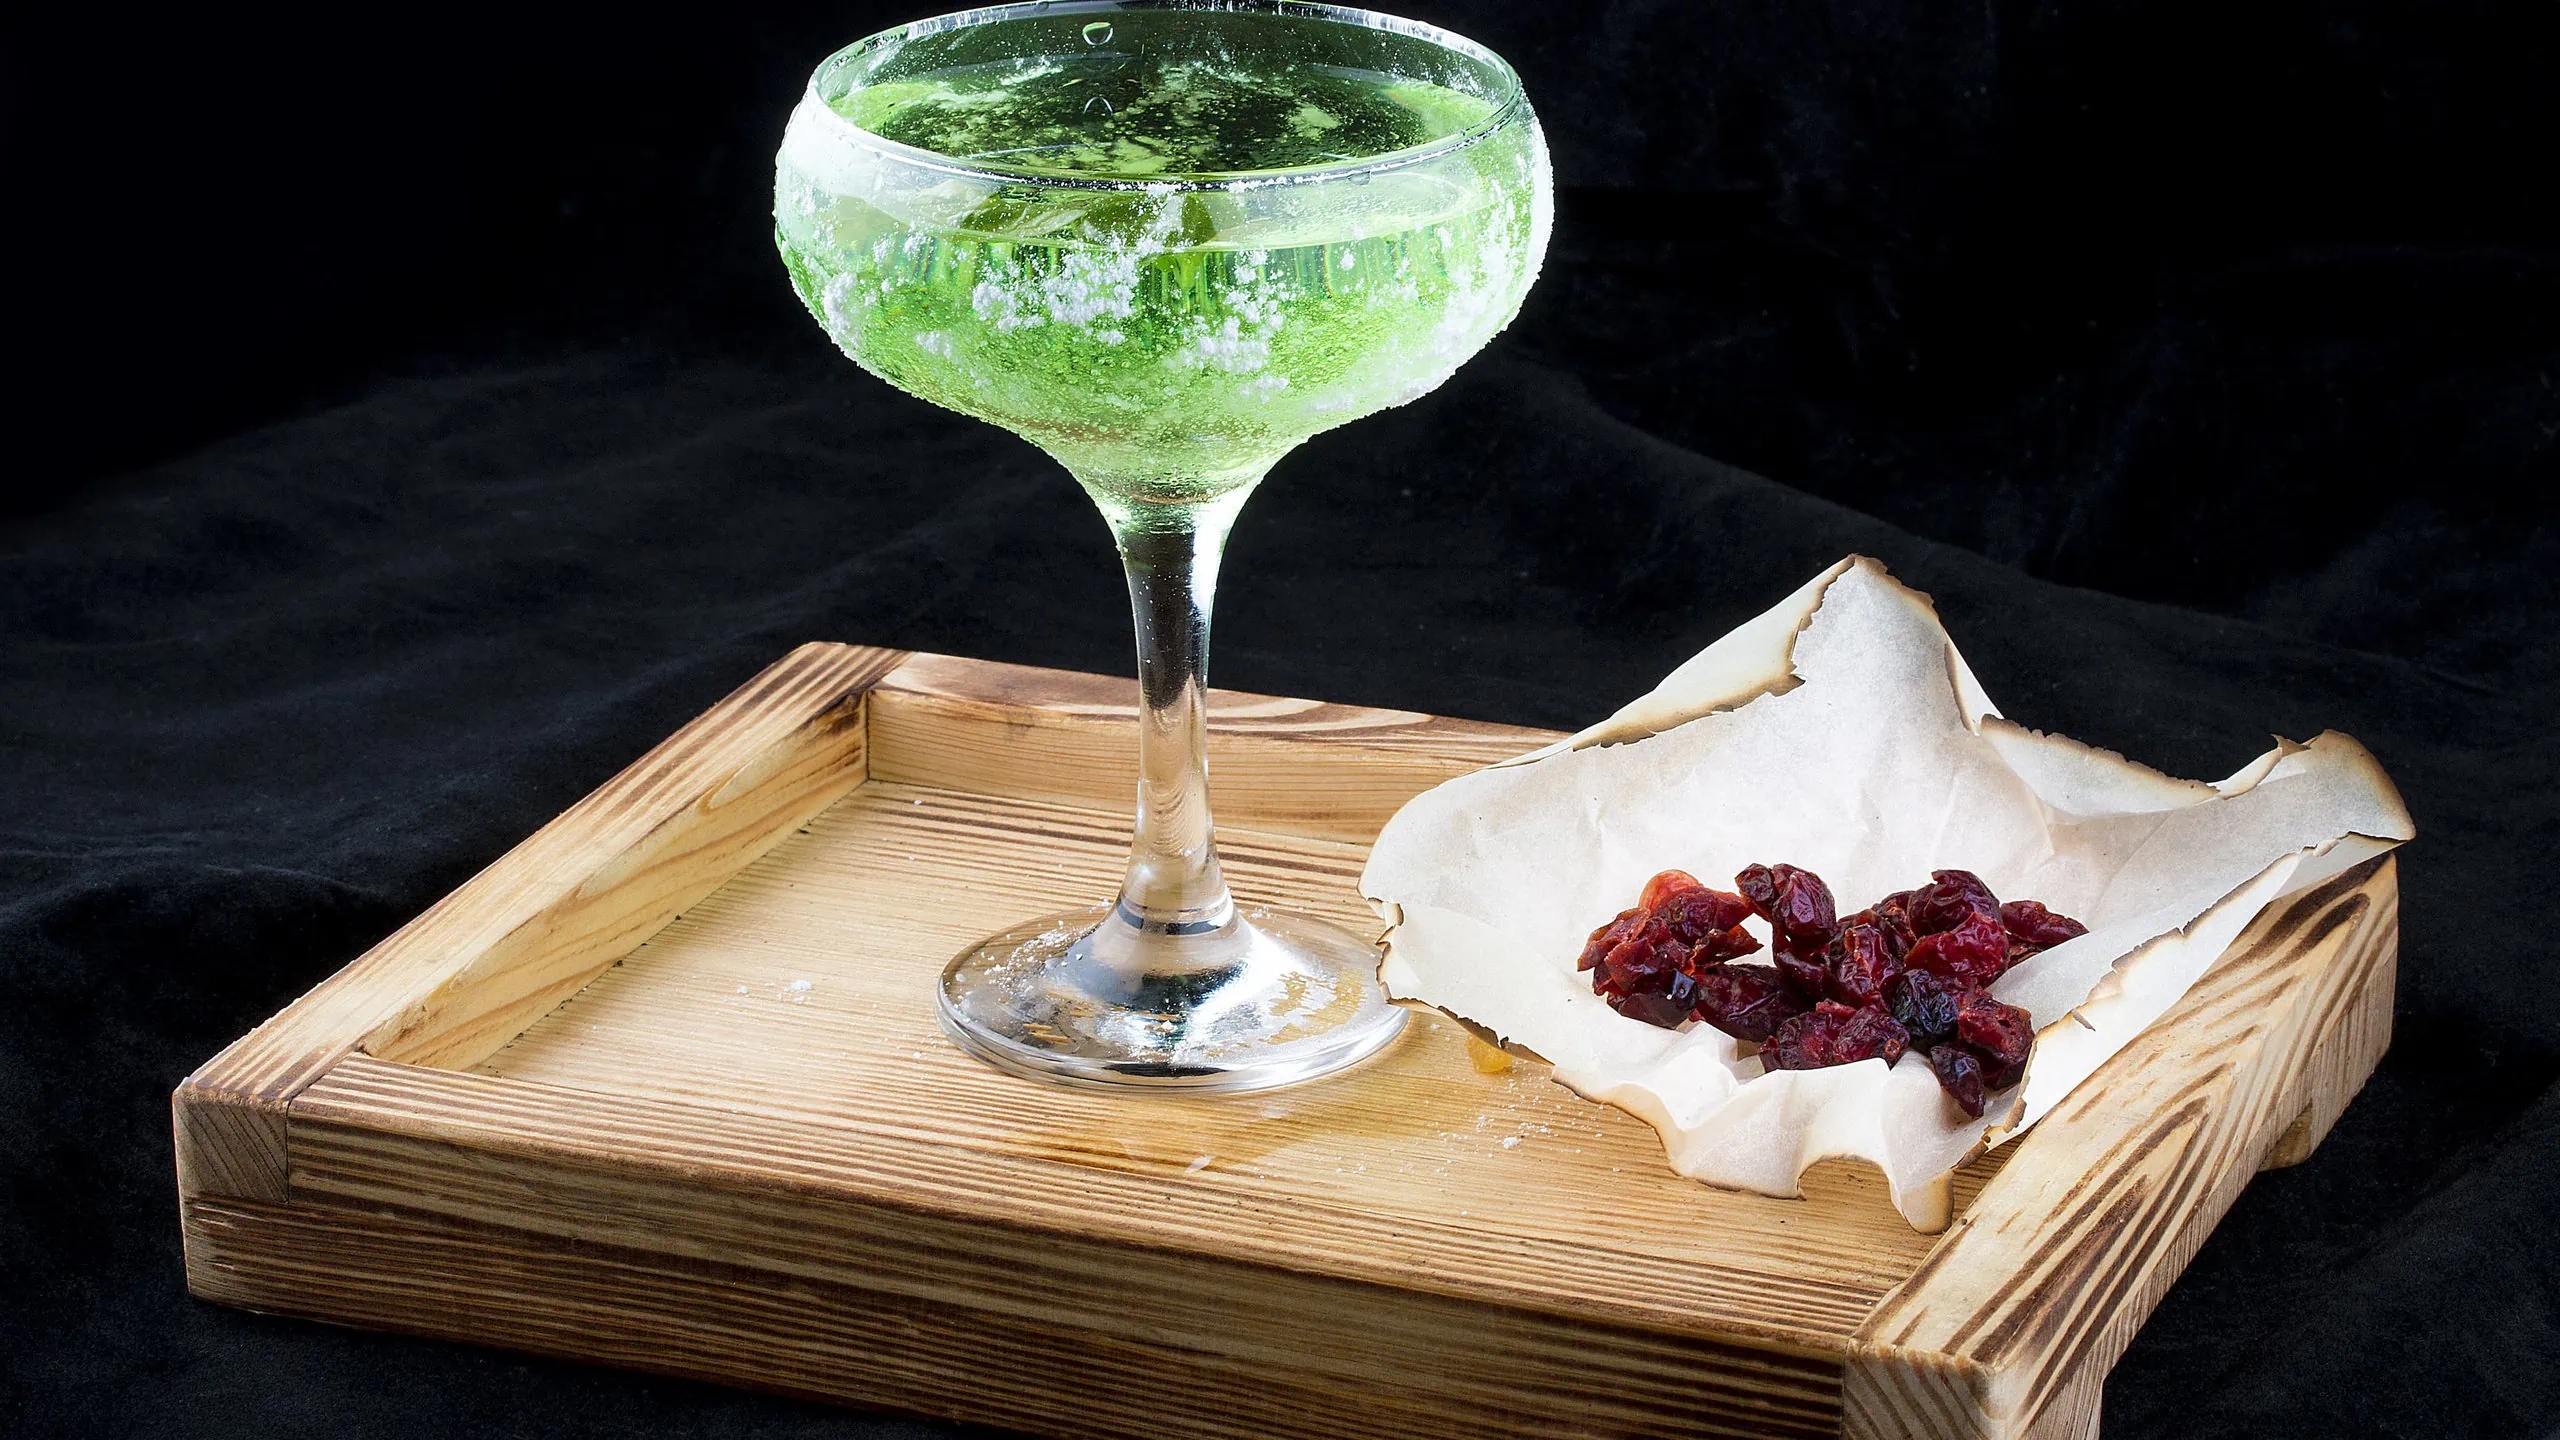 Goblin Glow martini recipe with candied fruit